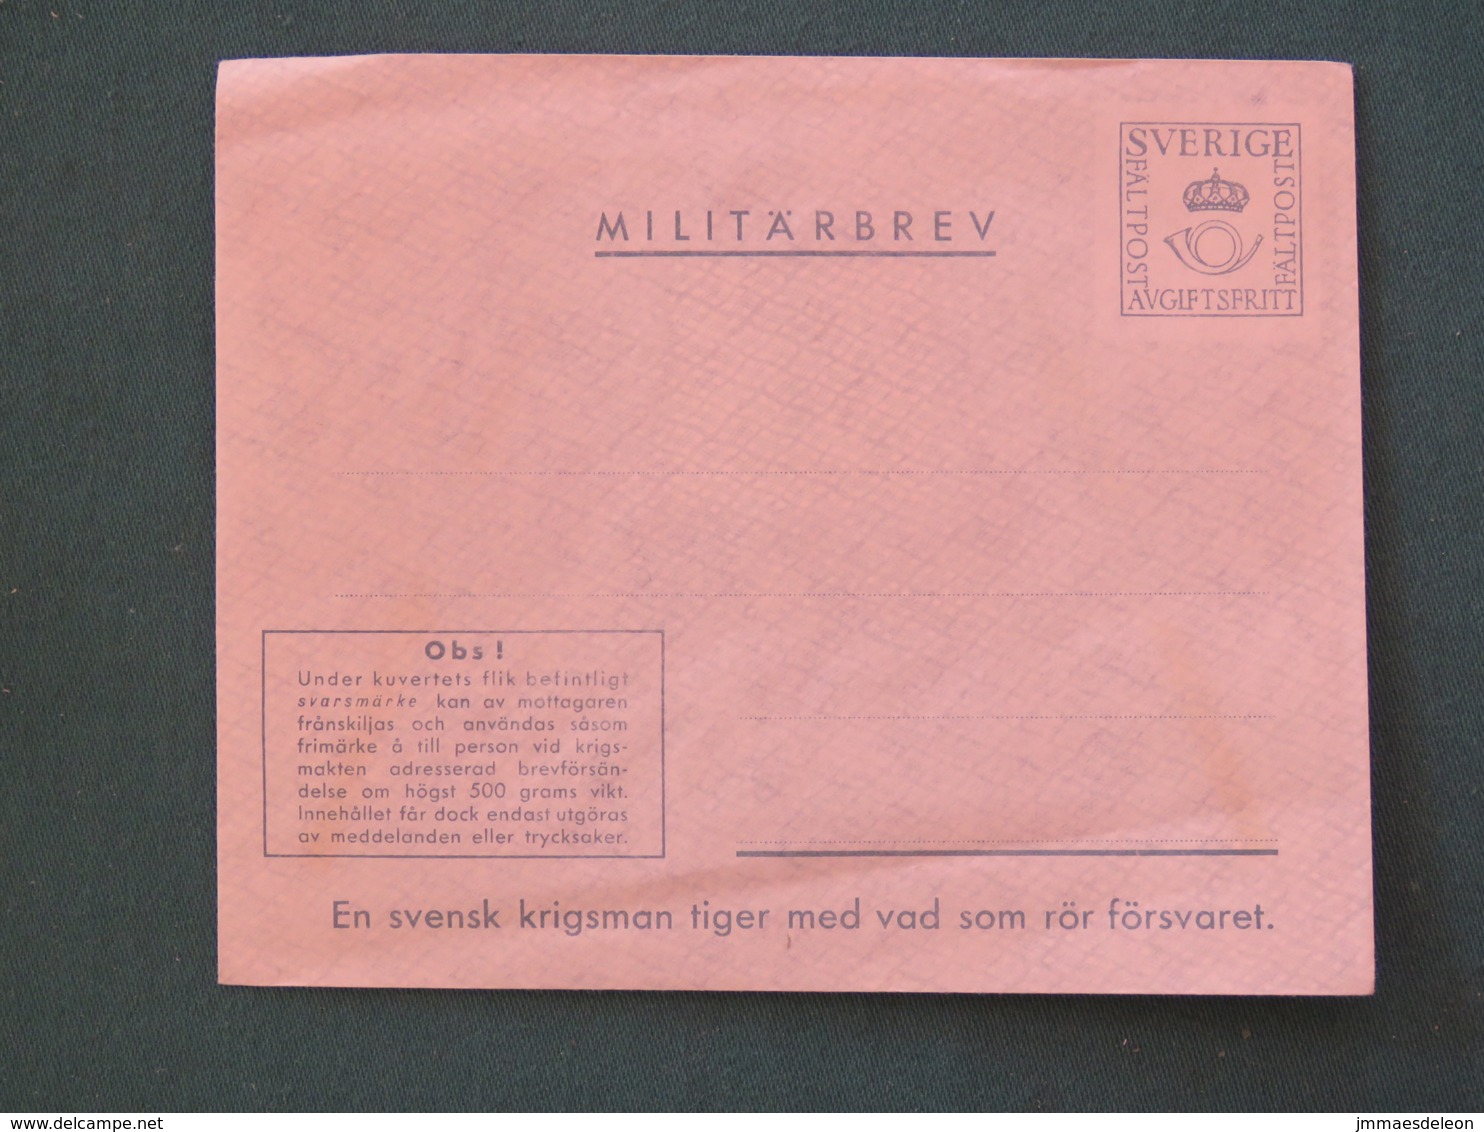 Sweden 1943 Military Army Unused Cover - Military